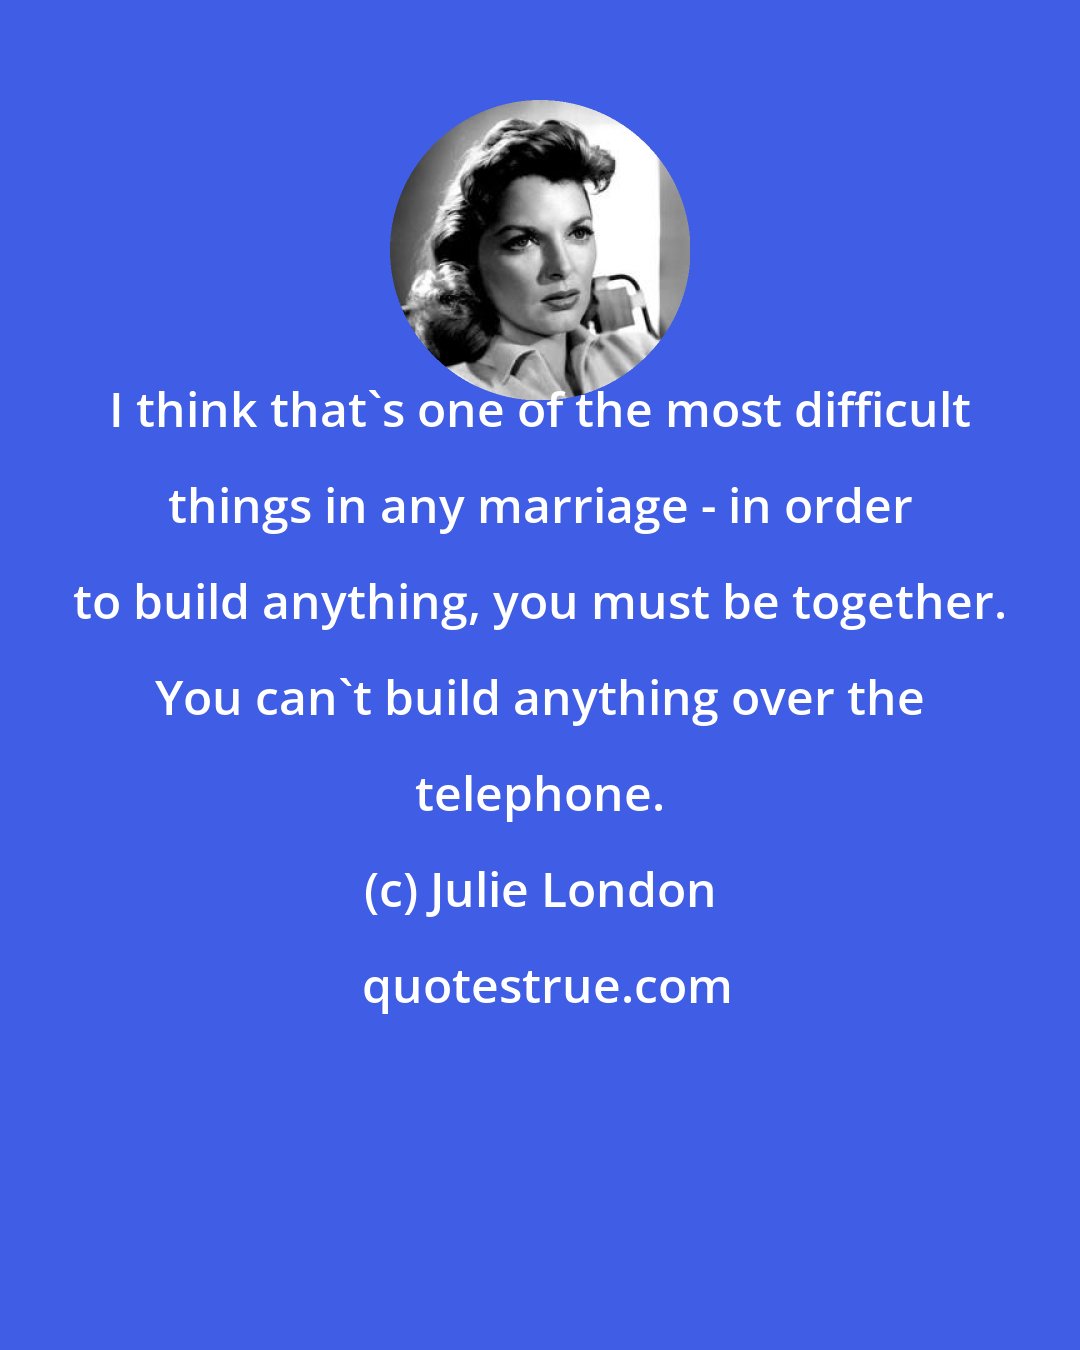 Julie London: I think that's one of the most difficult things in any marriage - in order to build anything, you must be together. You can't build anything over the telephone.